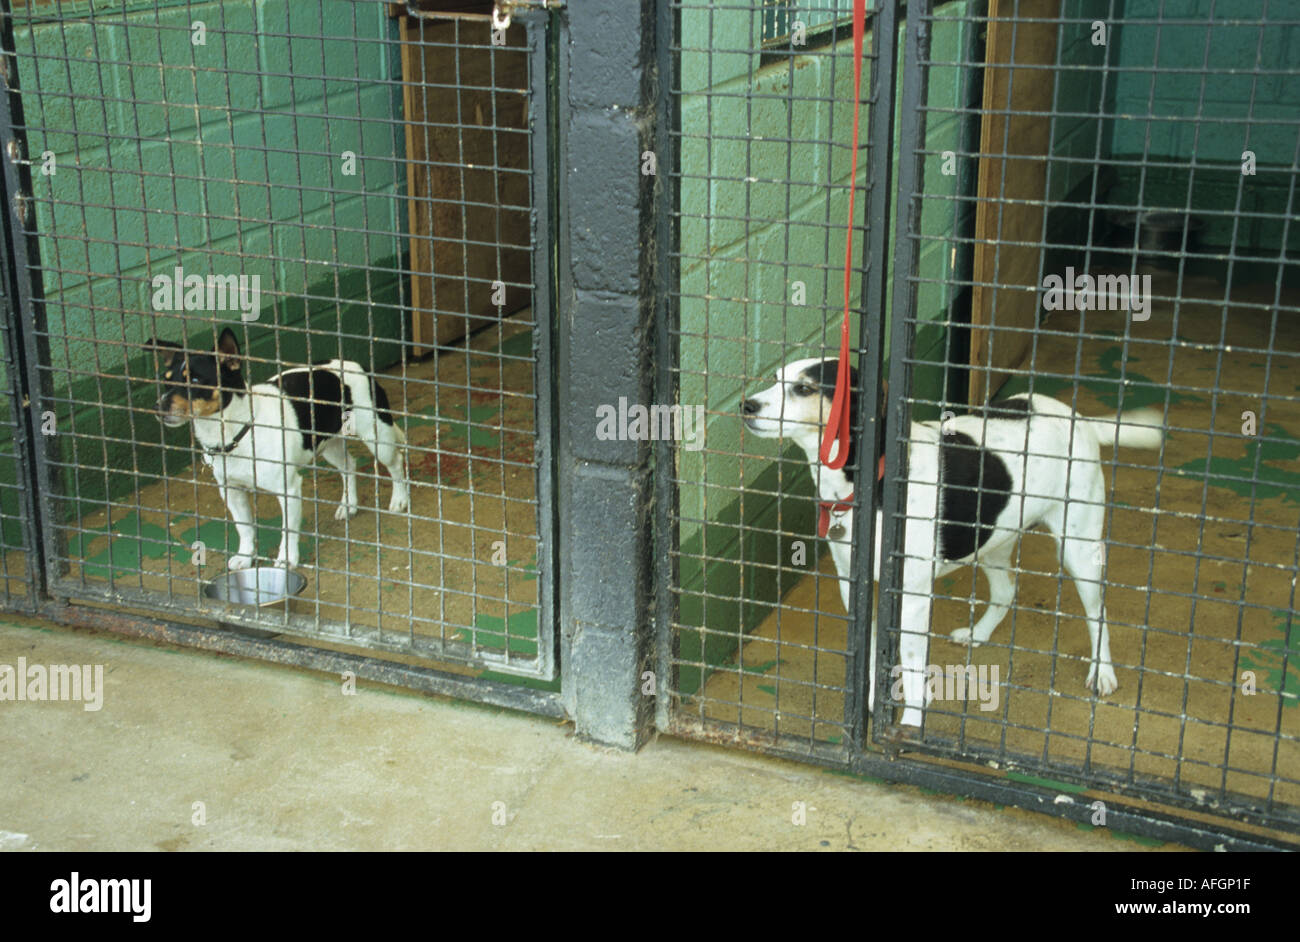 dog in boarding kennels could be a 